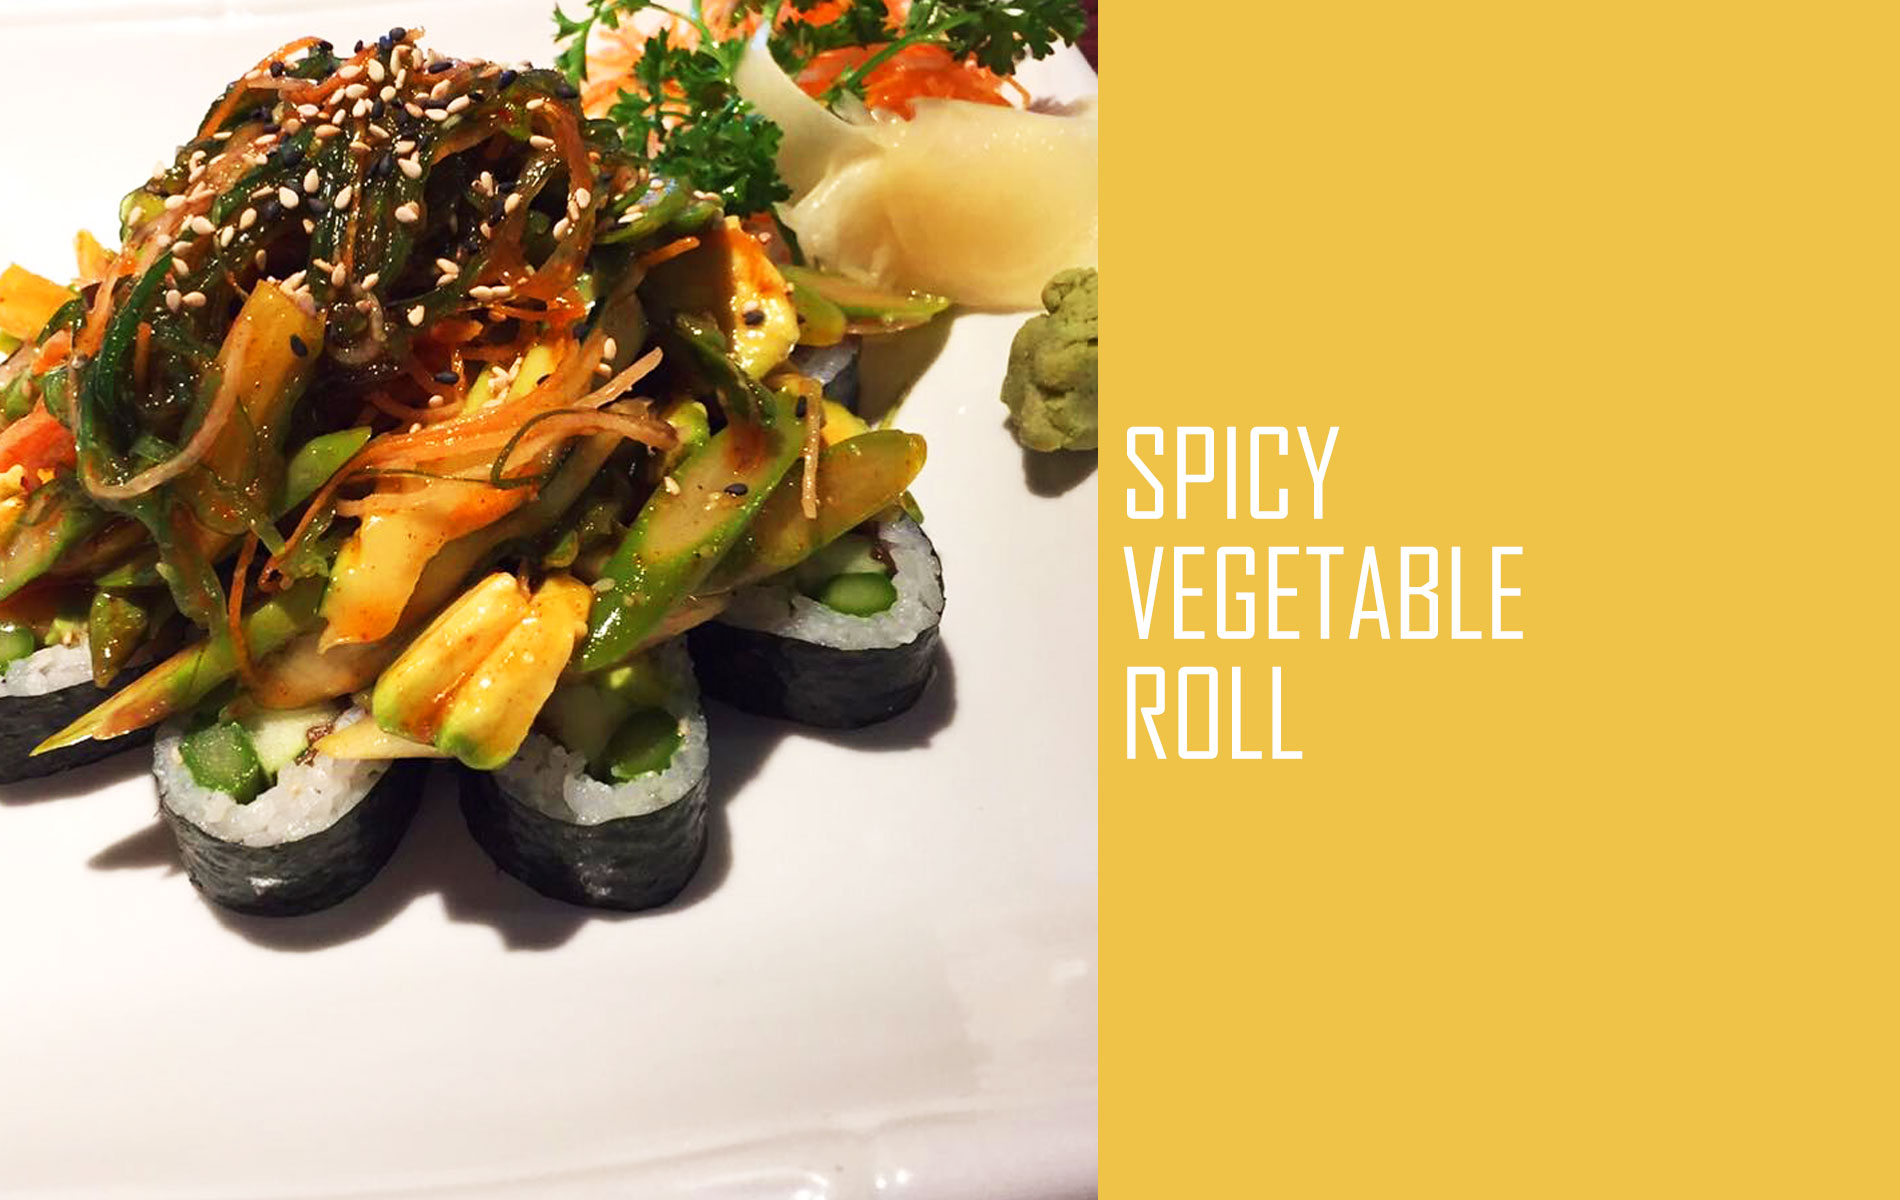 Spicy Vegetable Roll